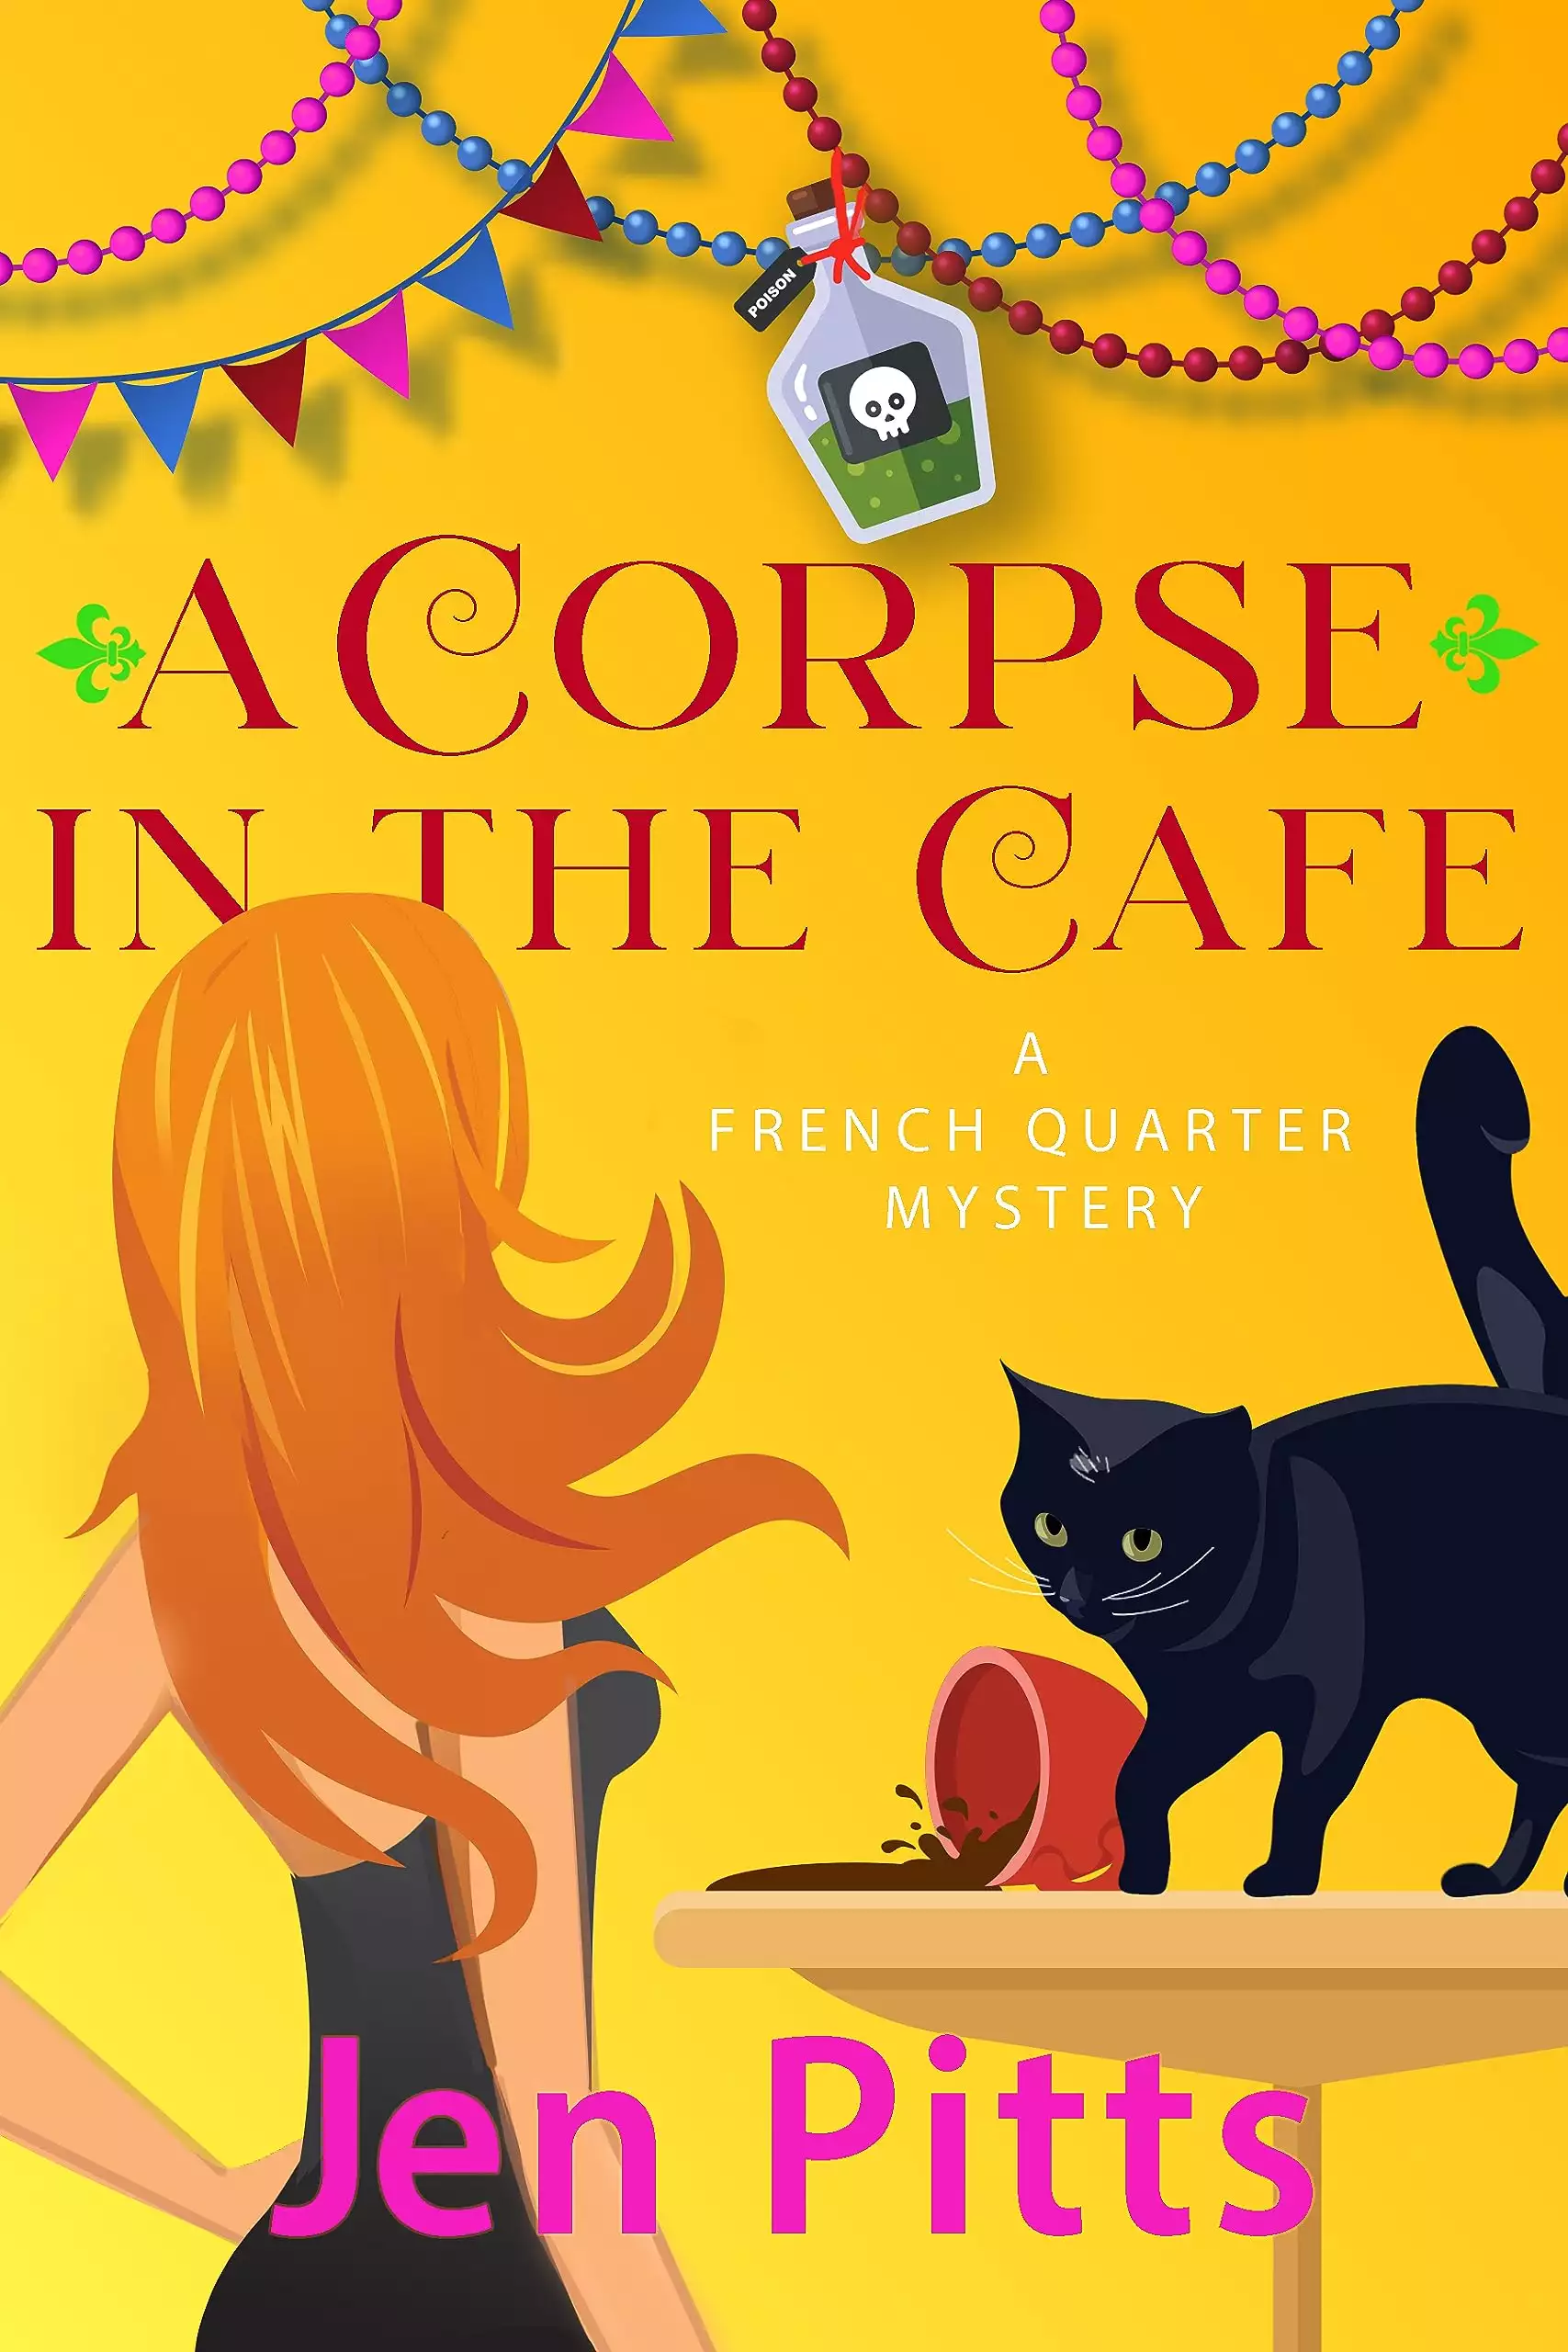 A Corpse in the Cafe: A French Quarter Mystery